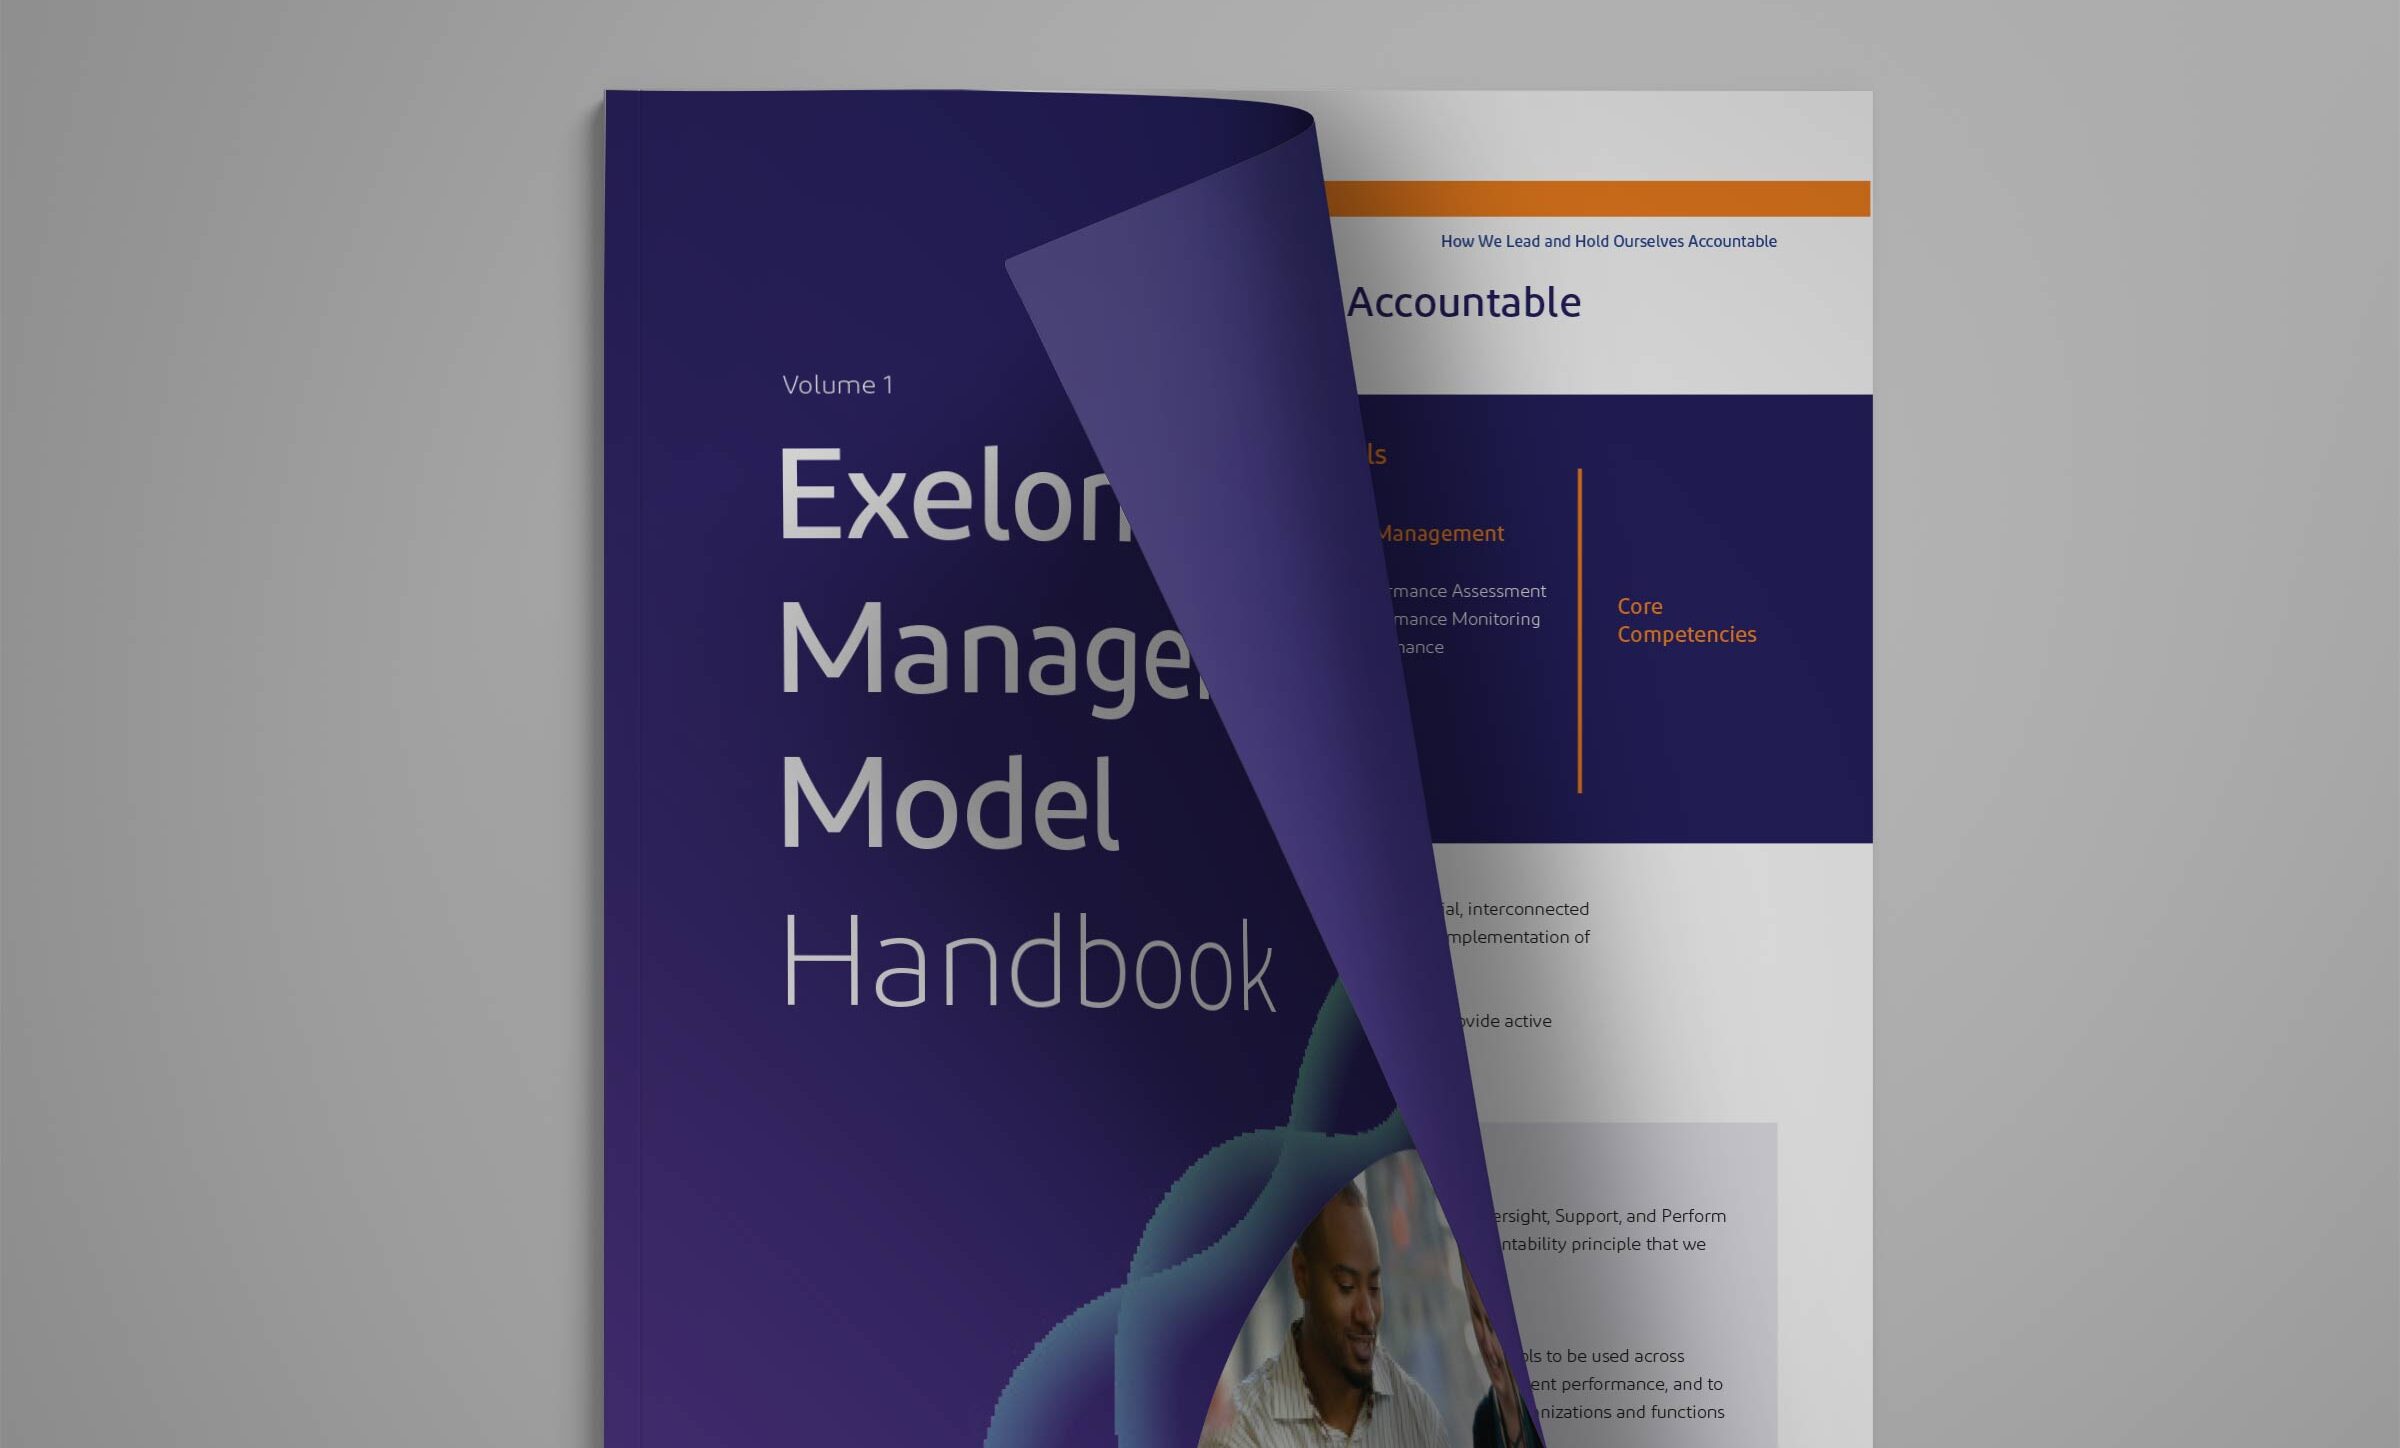 The management model handbook cover slightly opened showing a page.